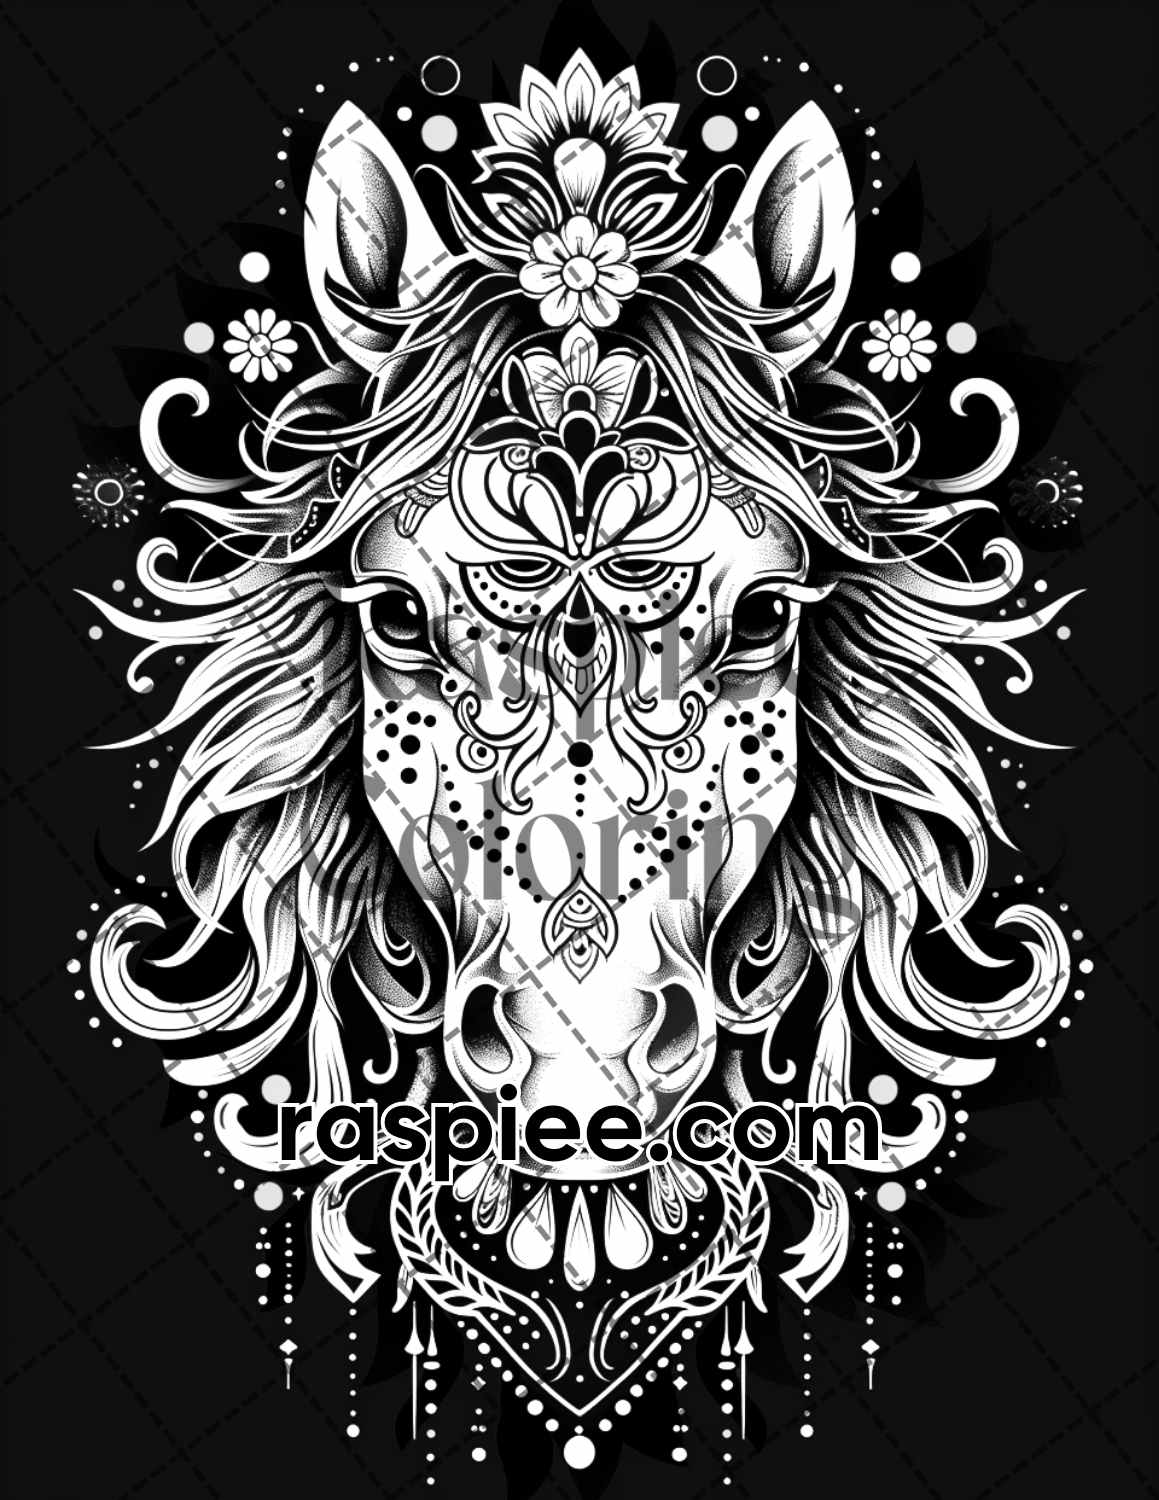 adult coloring pages, adult coloring sheets, adult coloring book pdf, adult coloring book printable, grayscale coloring pages, grayscale coloring books, grayscale illustration, animal adult coloring pages, animal adult coloring book